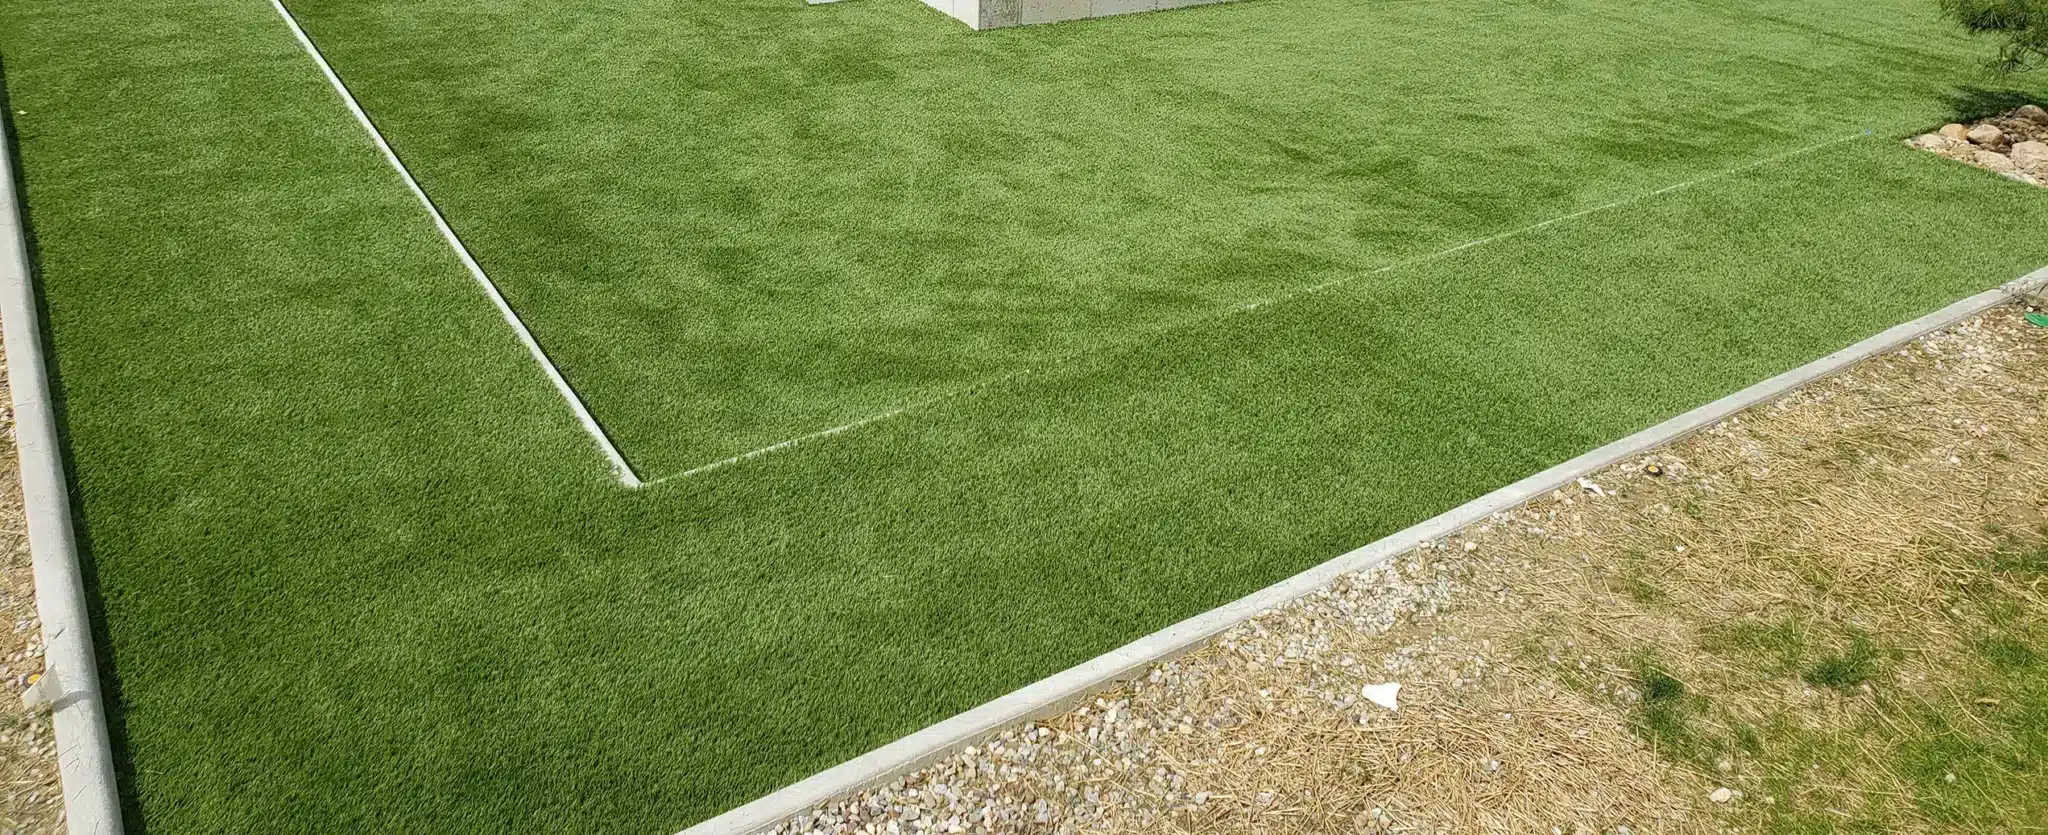 Artificial grass bocce ball court installed by SYNLawn